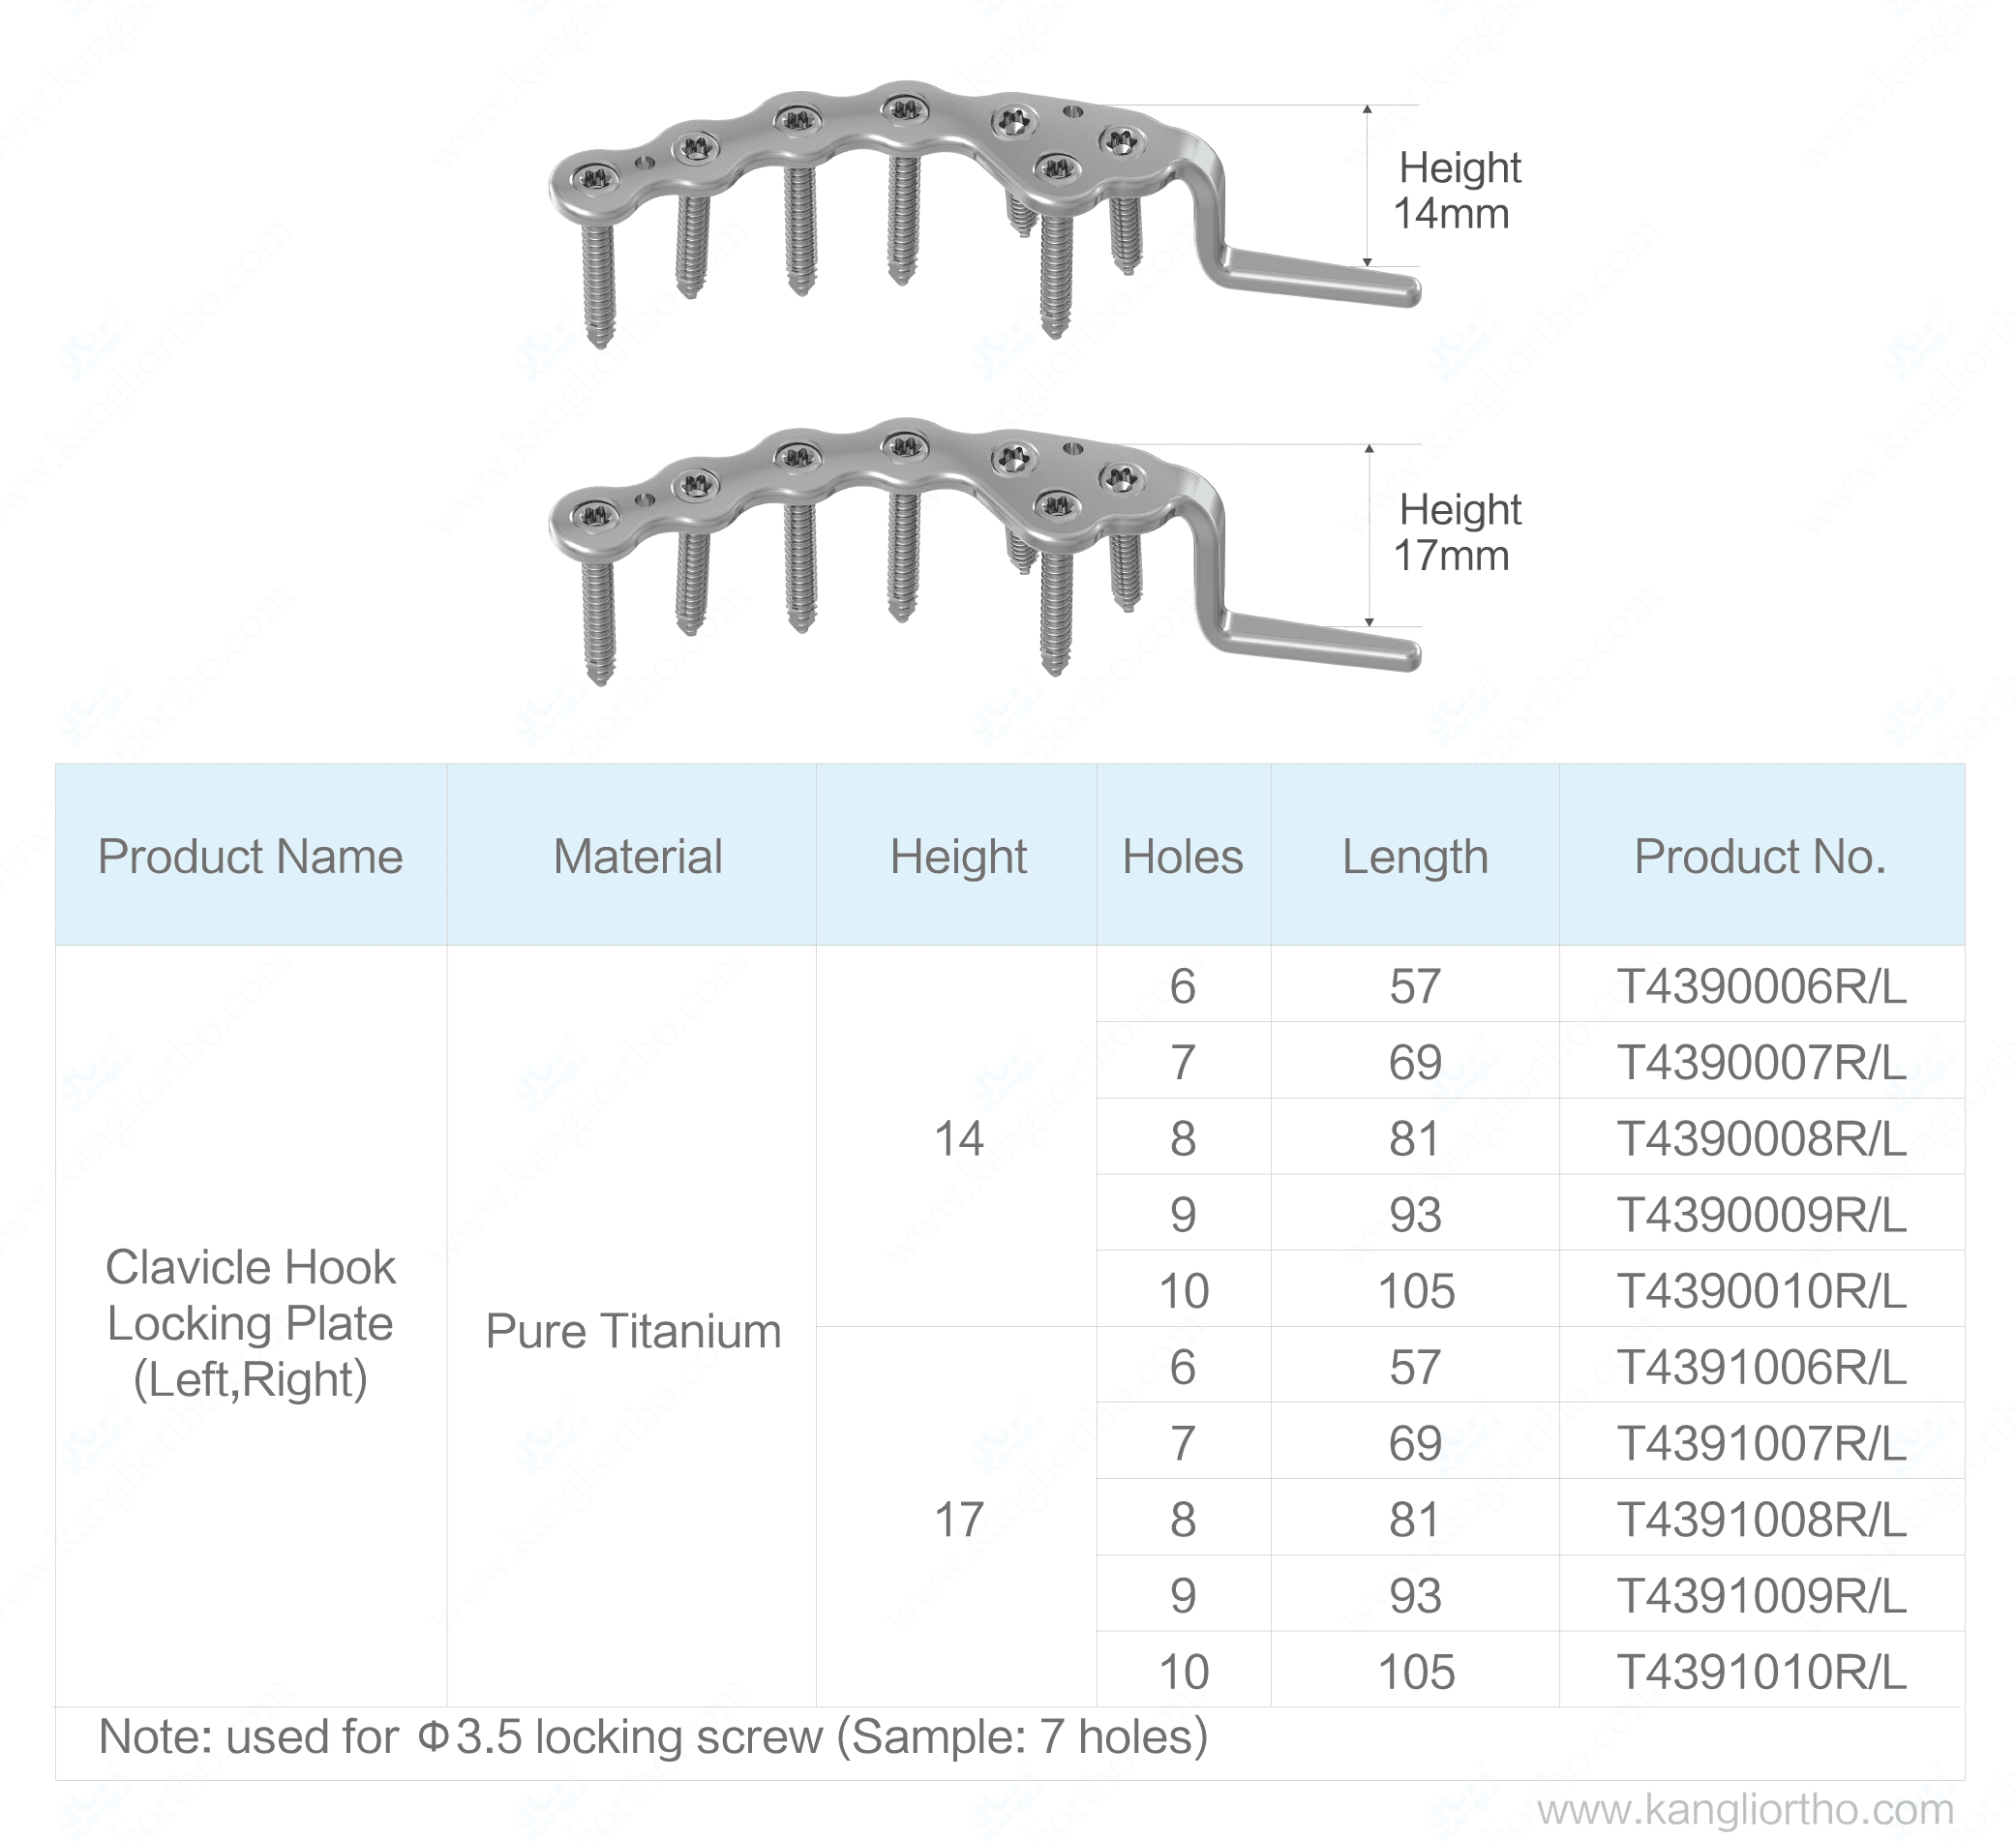 clavcle-hook-locking-plate-17-specifications